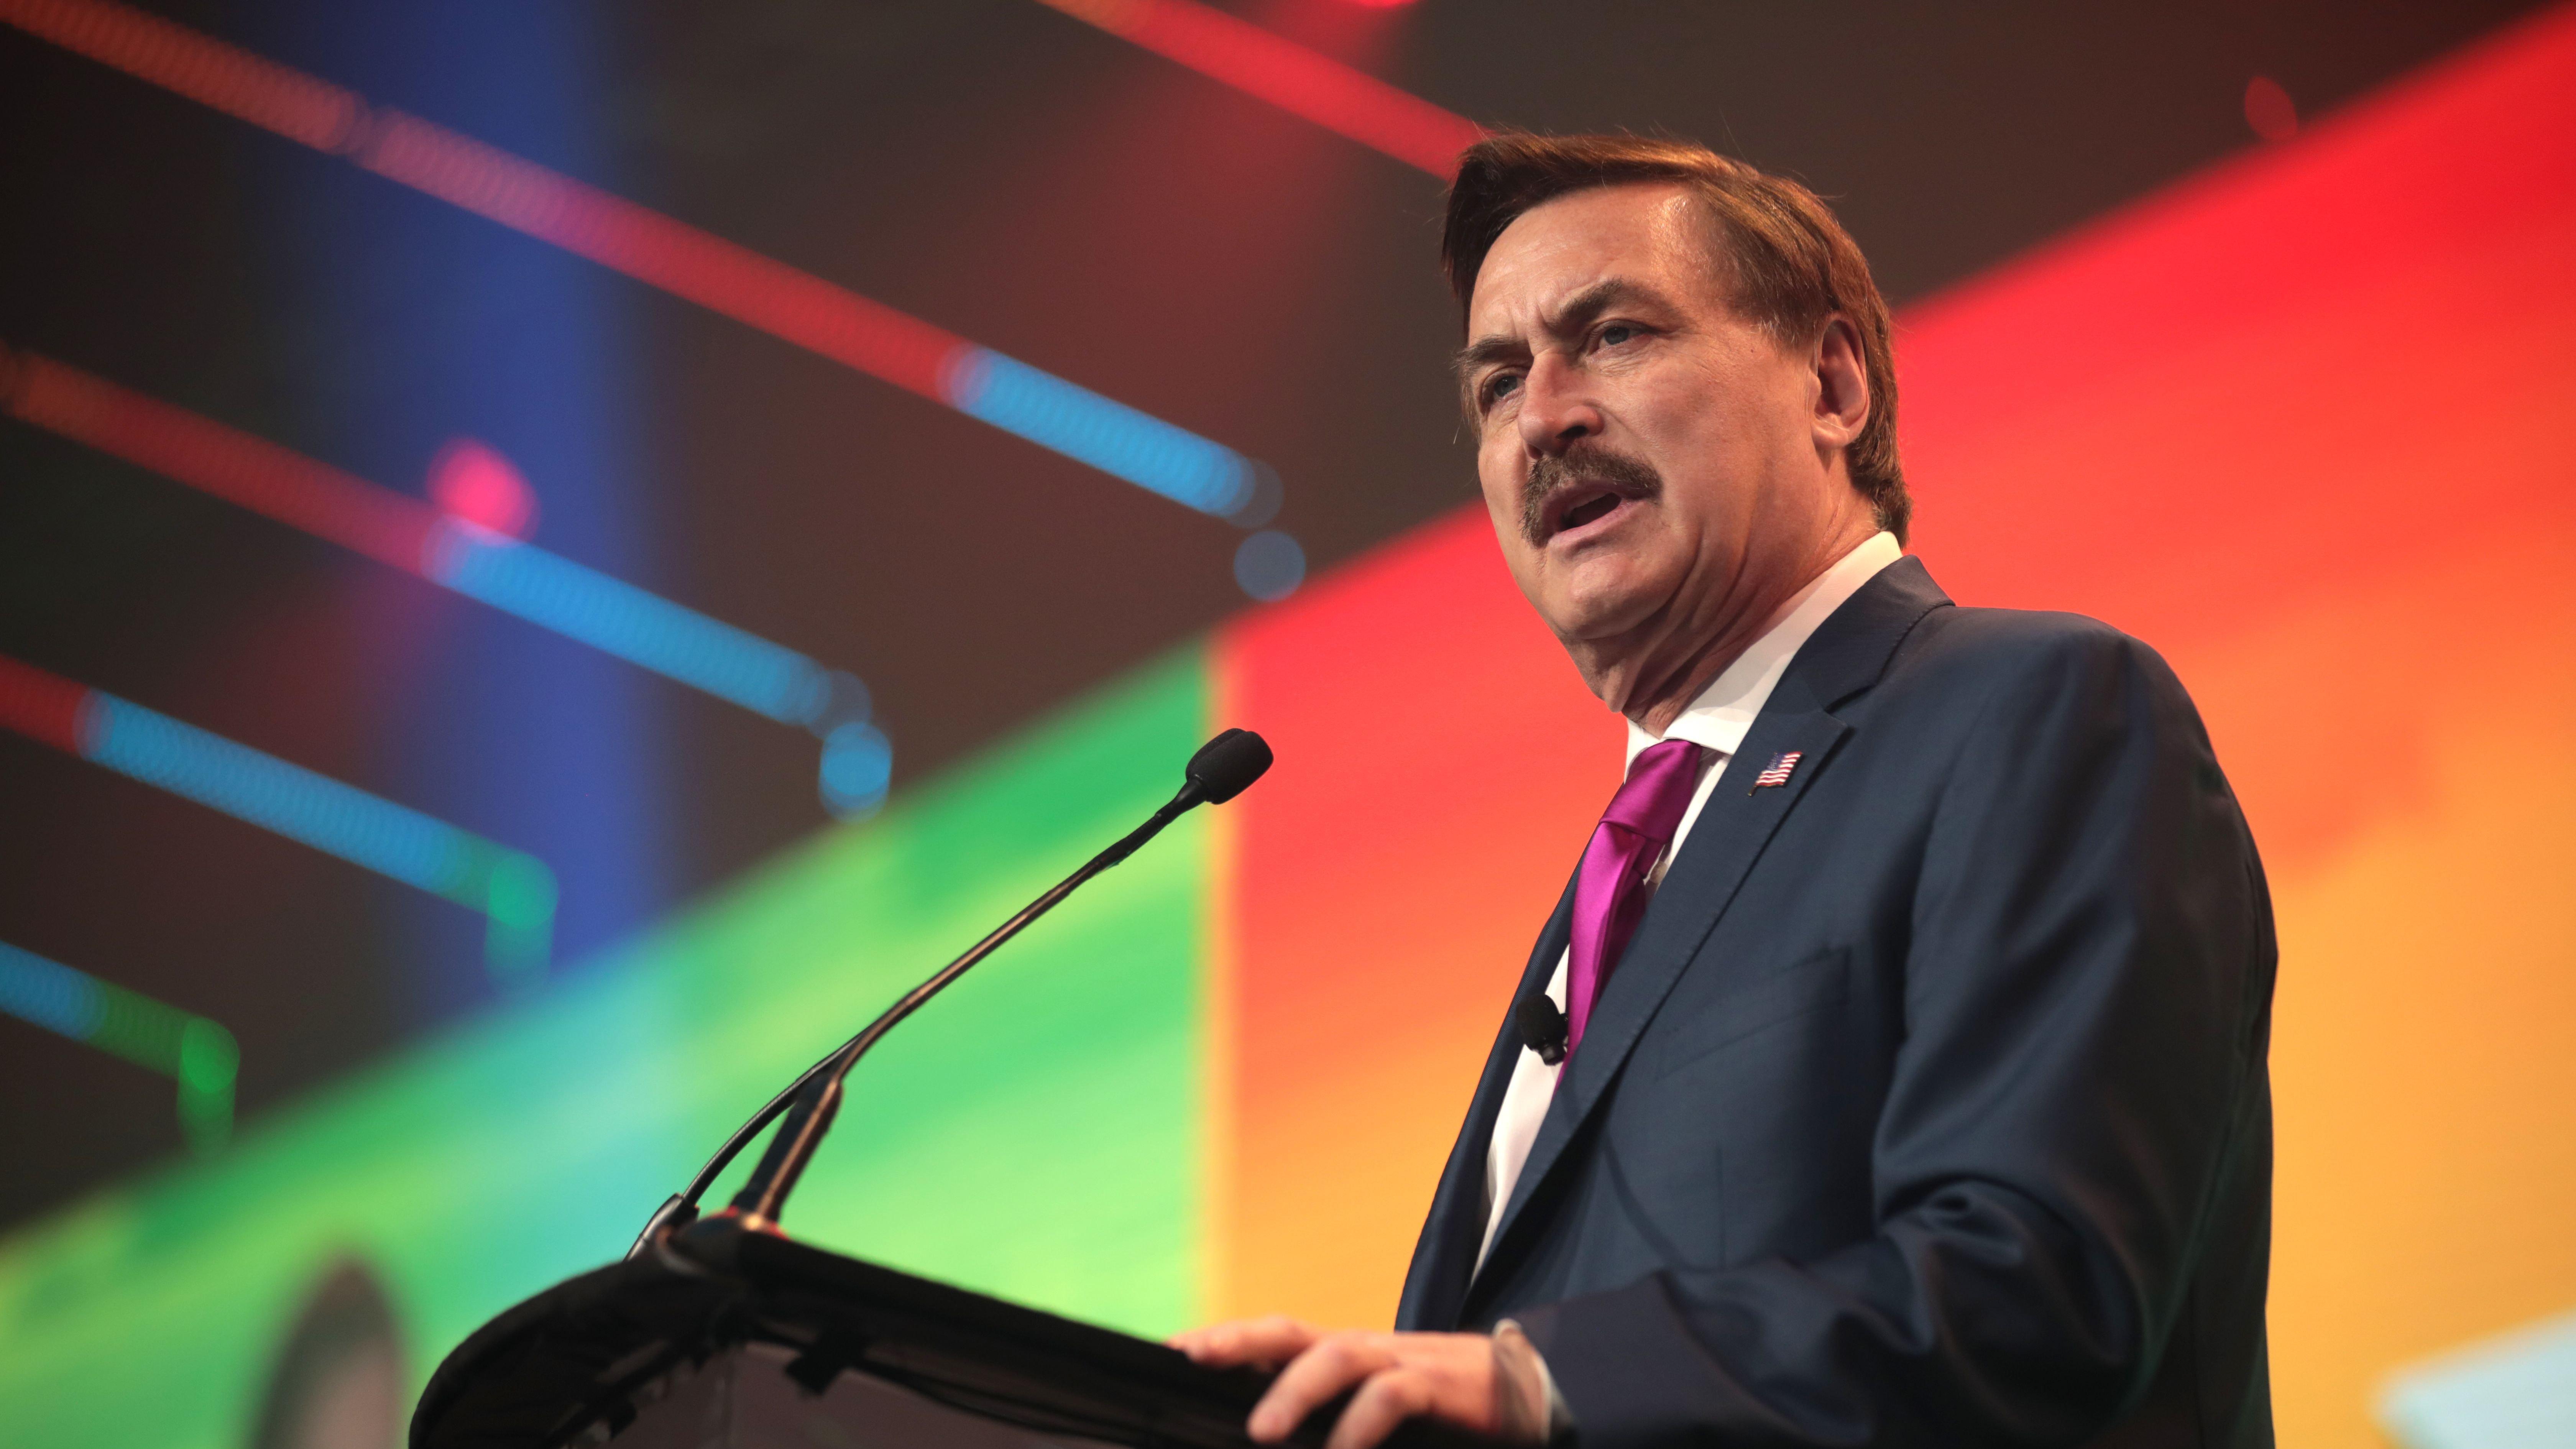 MyPillow CEO Mike Lindell delivers a speech